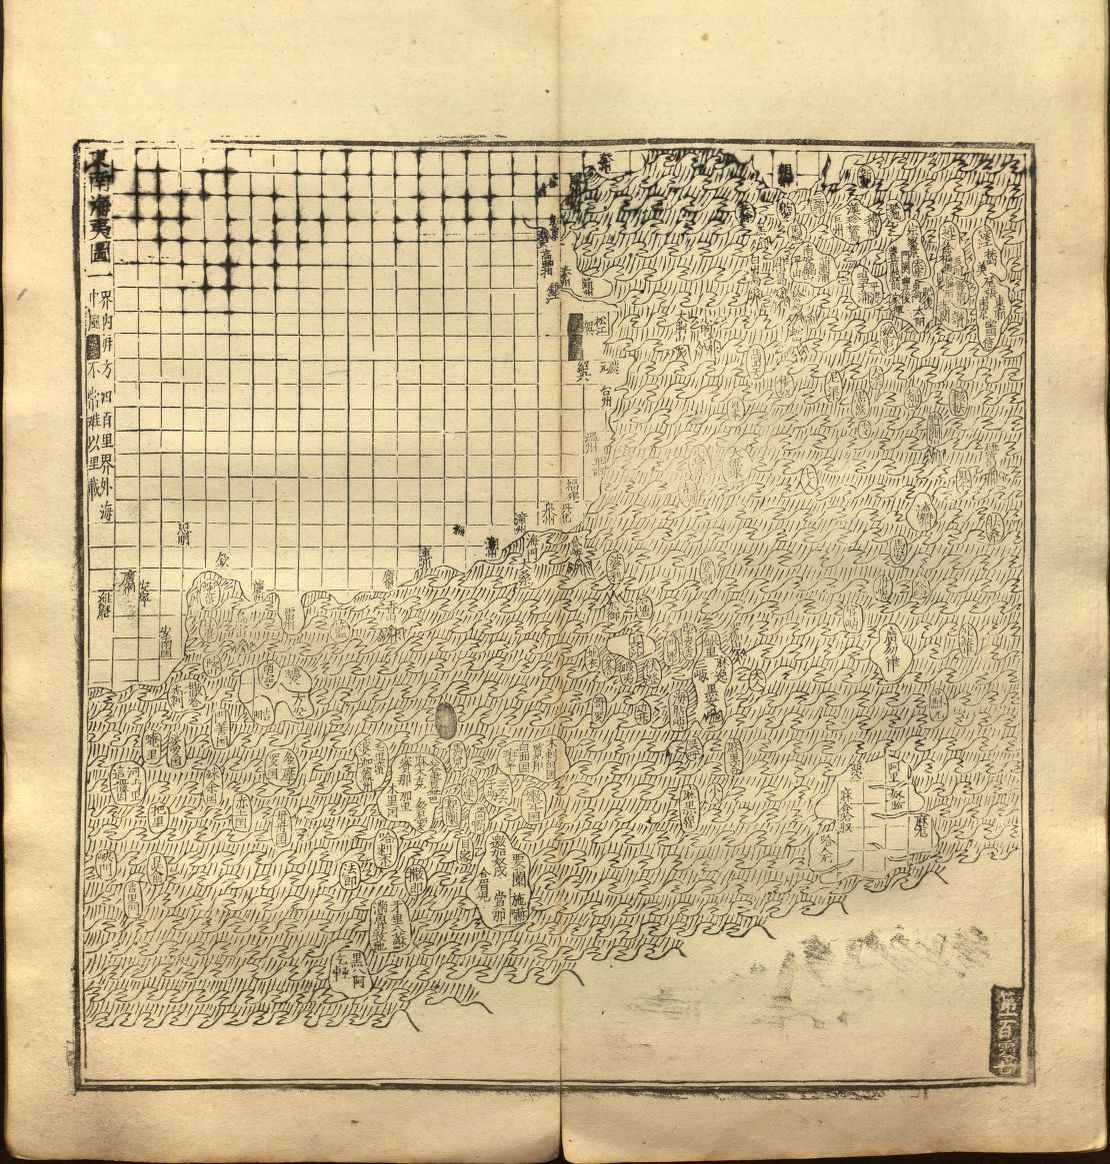 Hand drawn map with a grid showing land and coastline